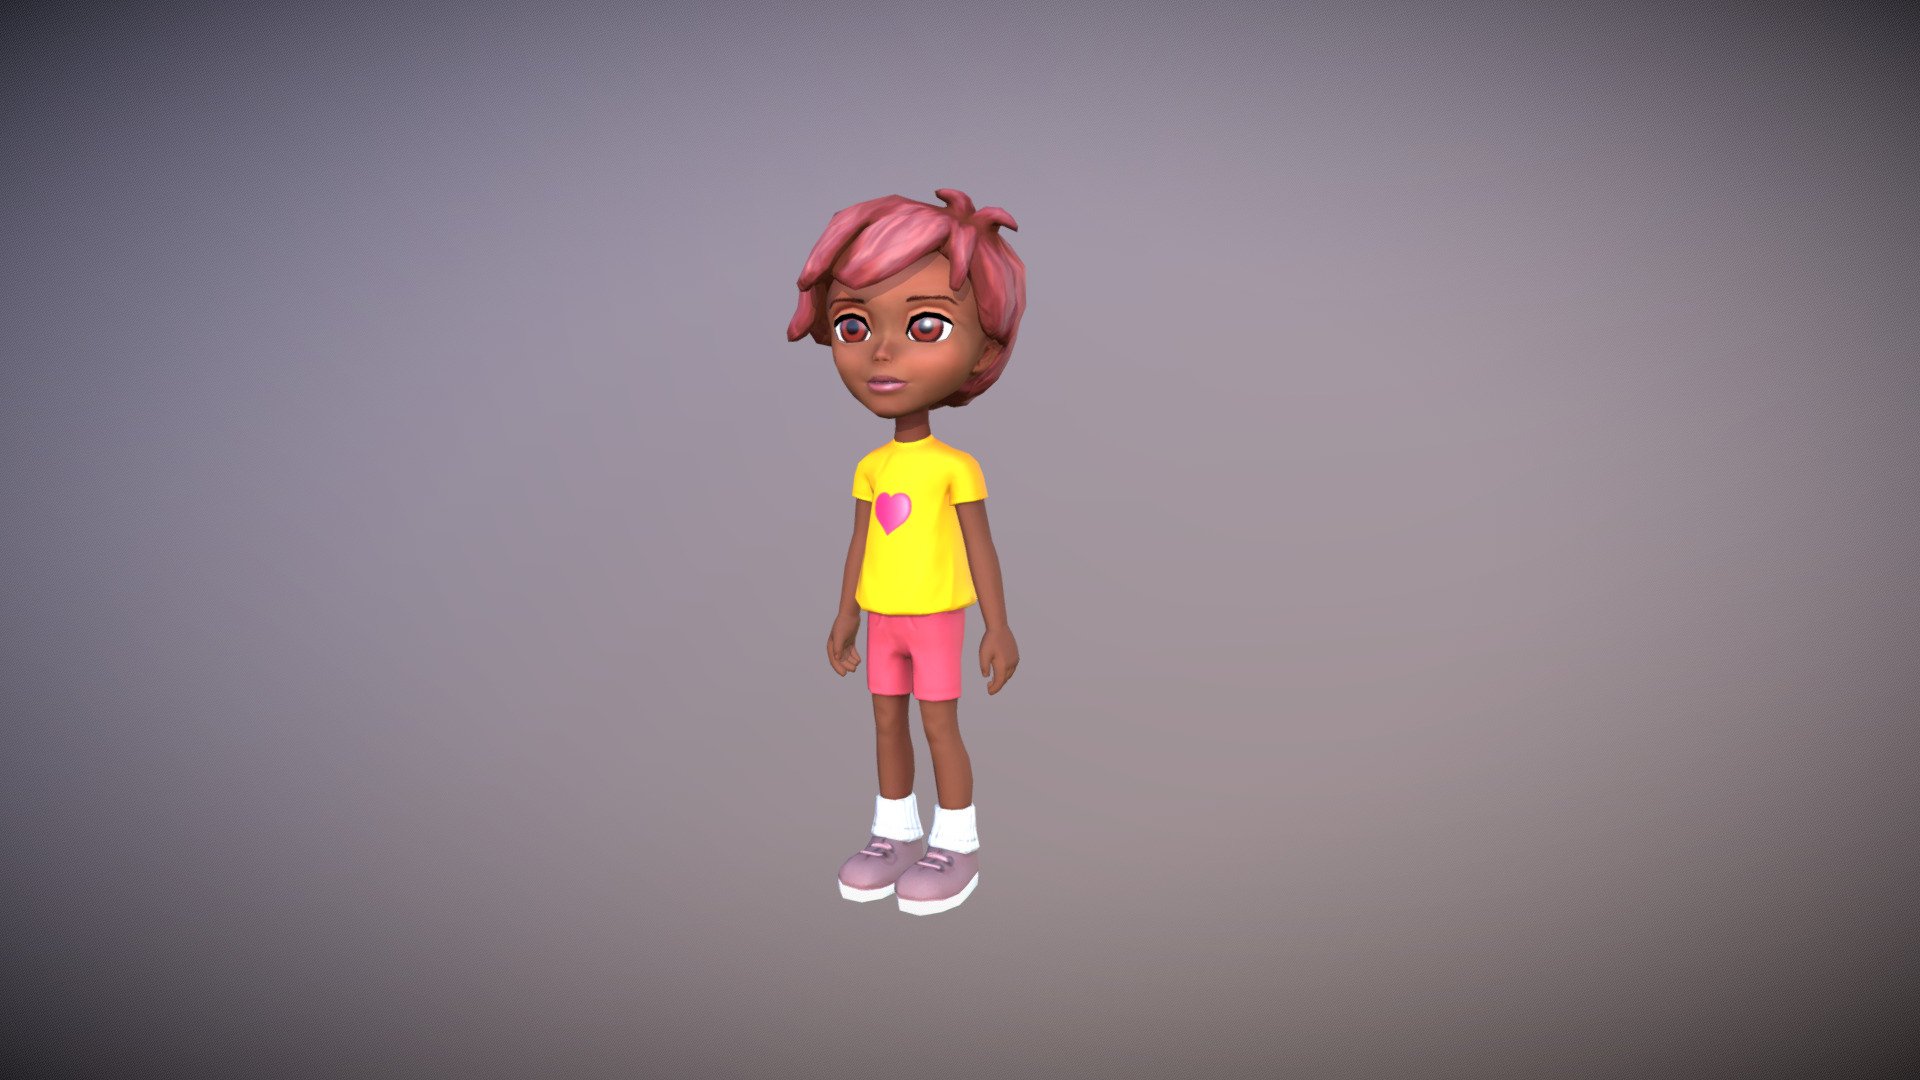 3D model of a kid - remake of the downloadable model. Updated with Normal (OpenGL), Specular and Roughness maps. Blend file and glTF now included 3d model